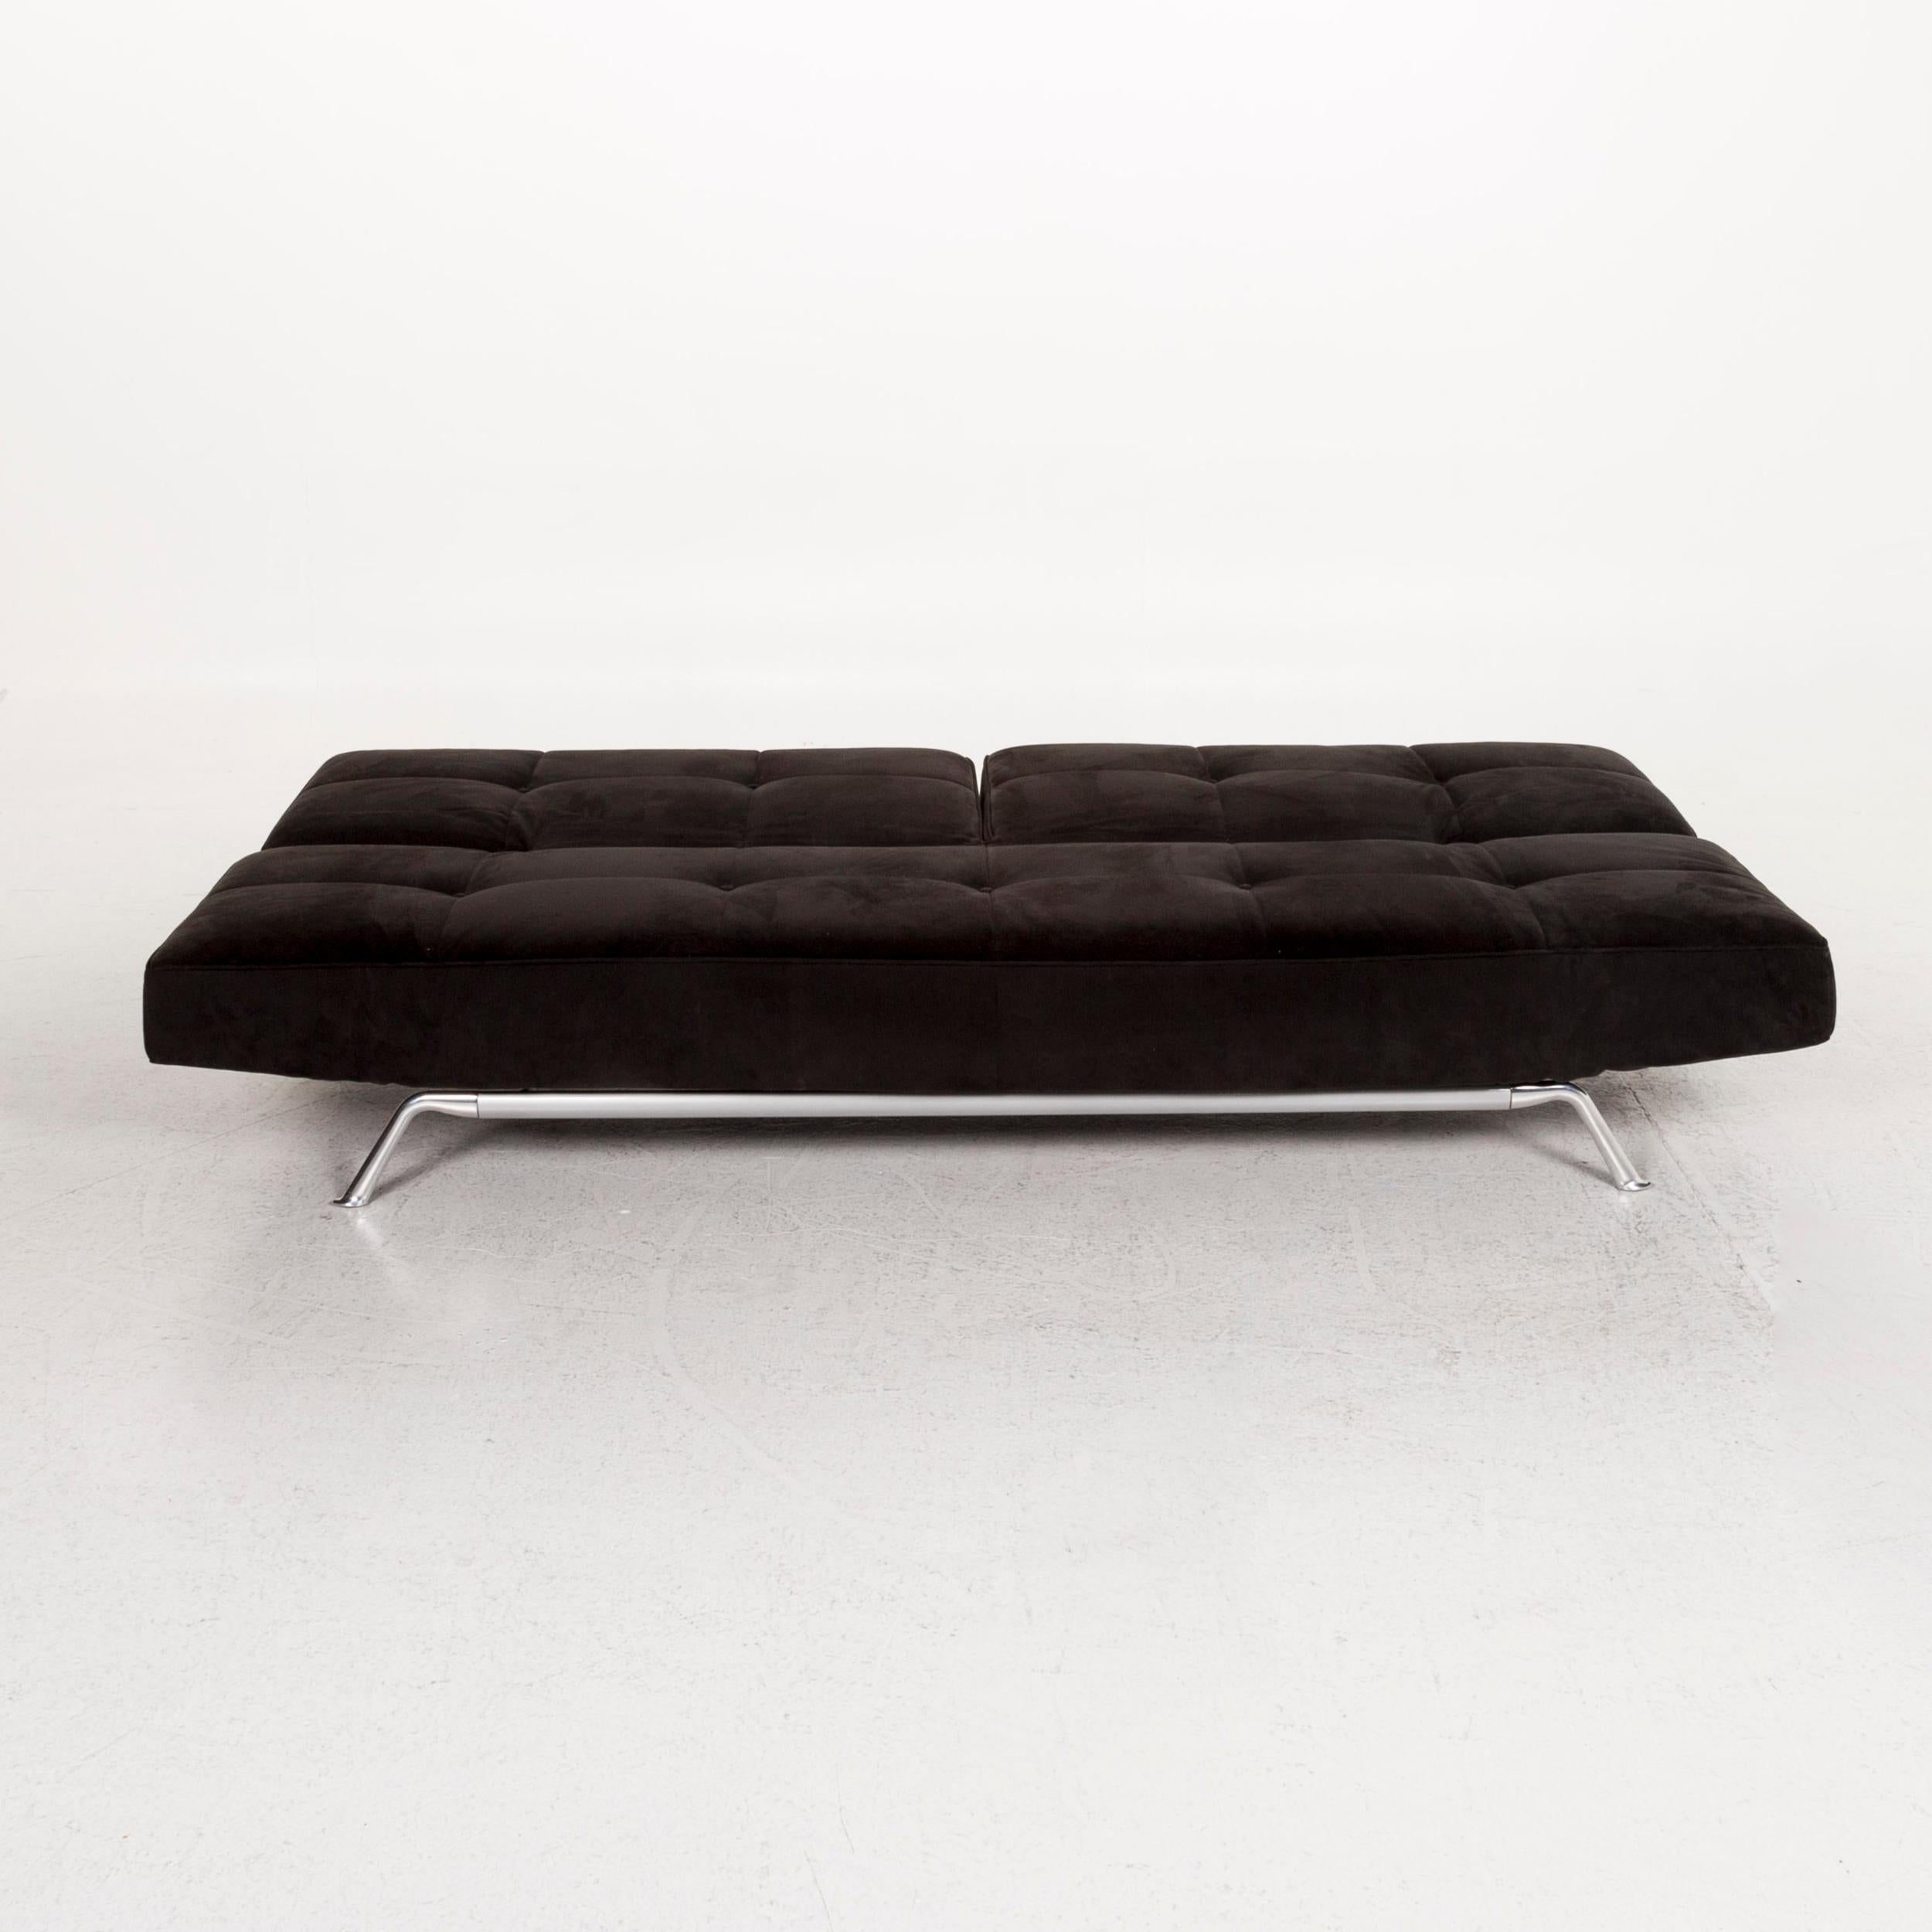 We bring to you a Ligne Roset Smala fabric sofa black three-seat sofa function sofa bed function.

 

 Product measurements in centimeters:
 

Depth 117
Width 200
Height 72
Seat-height 40
Rest-height 63
Seat-depth 58
Seat-width